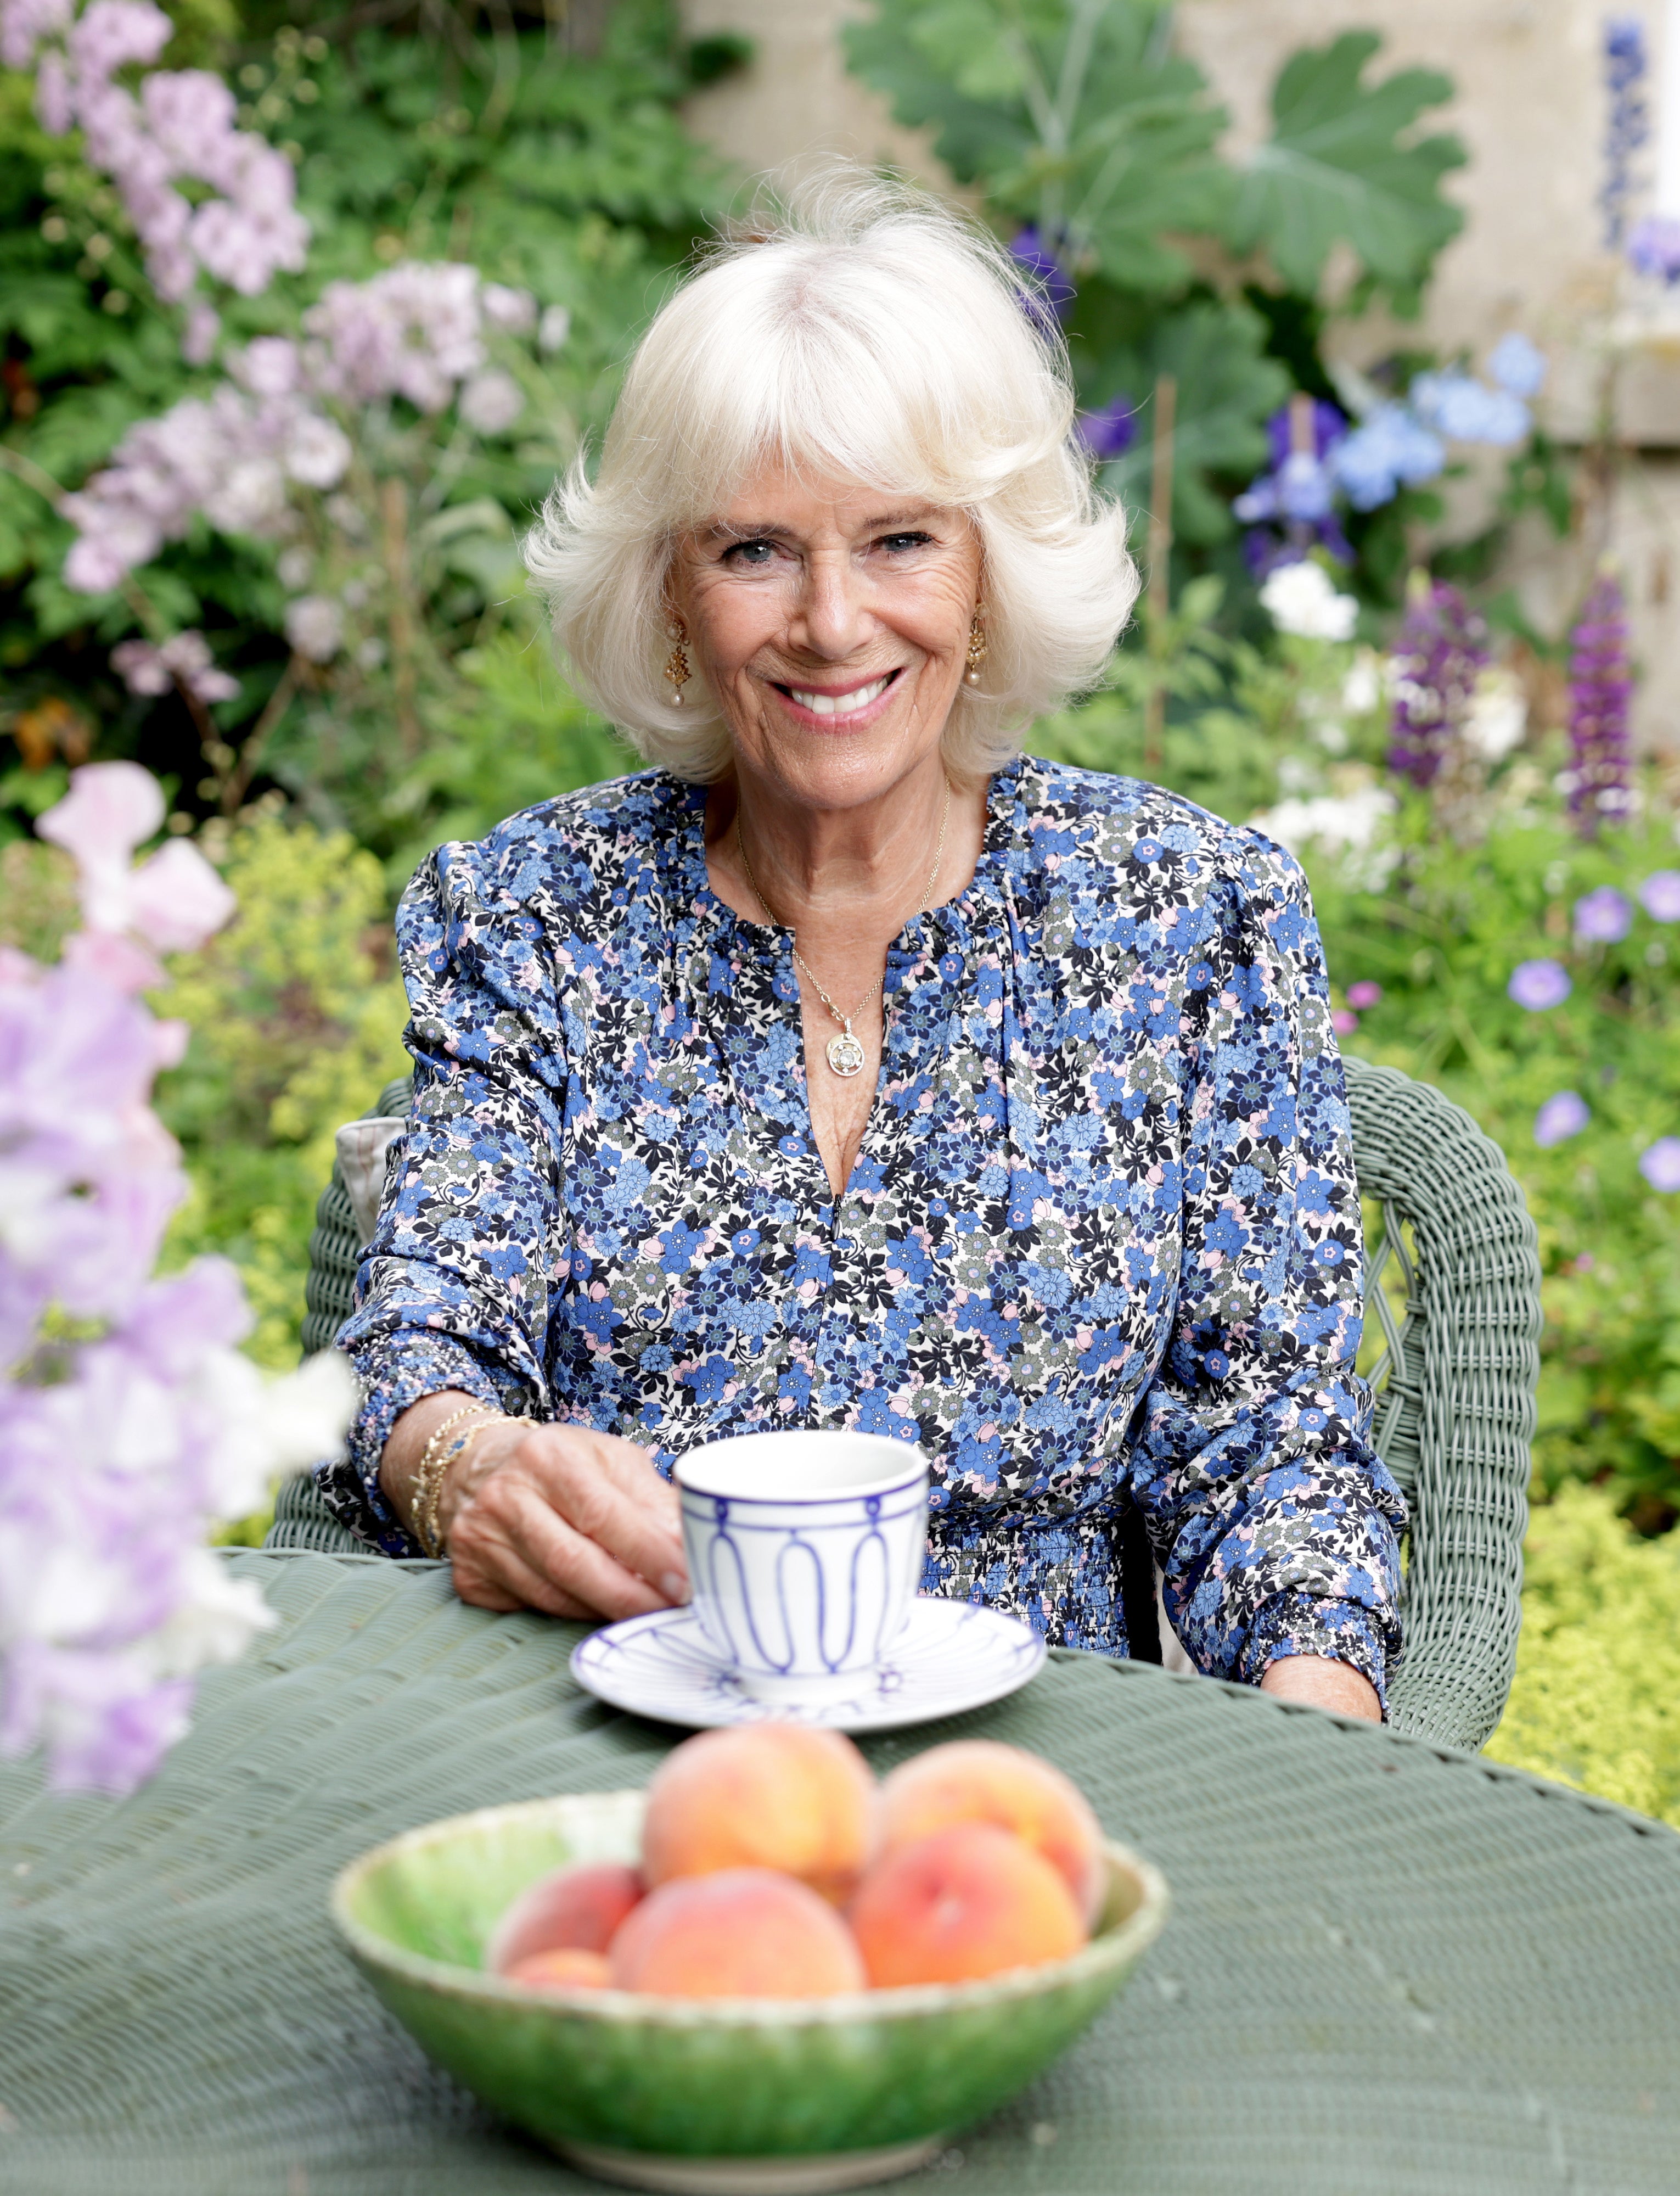 The Duchess of Cornwall poses at her home in Wiltshire for an official portrait to mark her 75th birthday (Chris Jackson/Clarence House/PA)